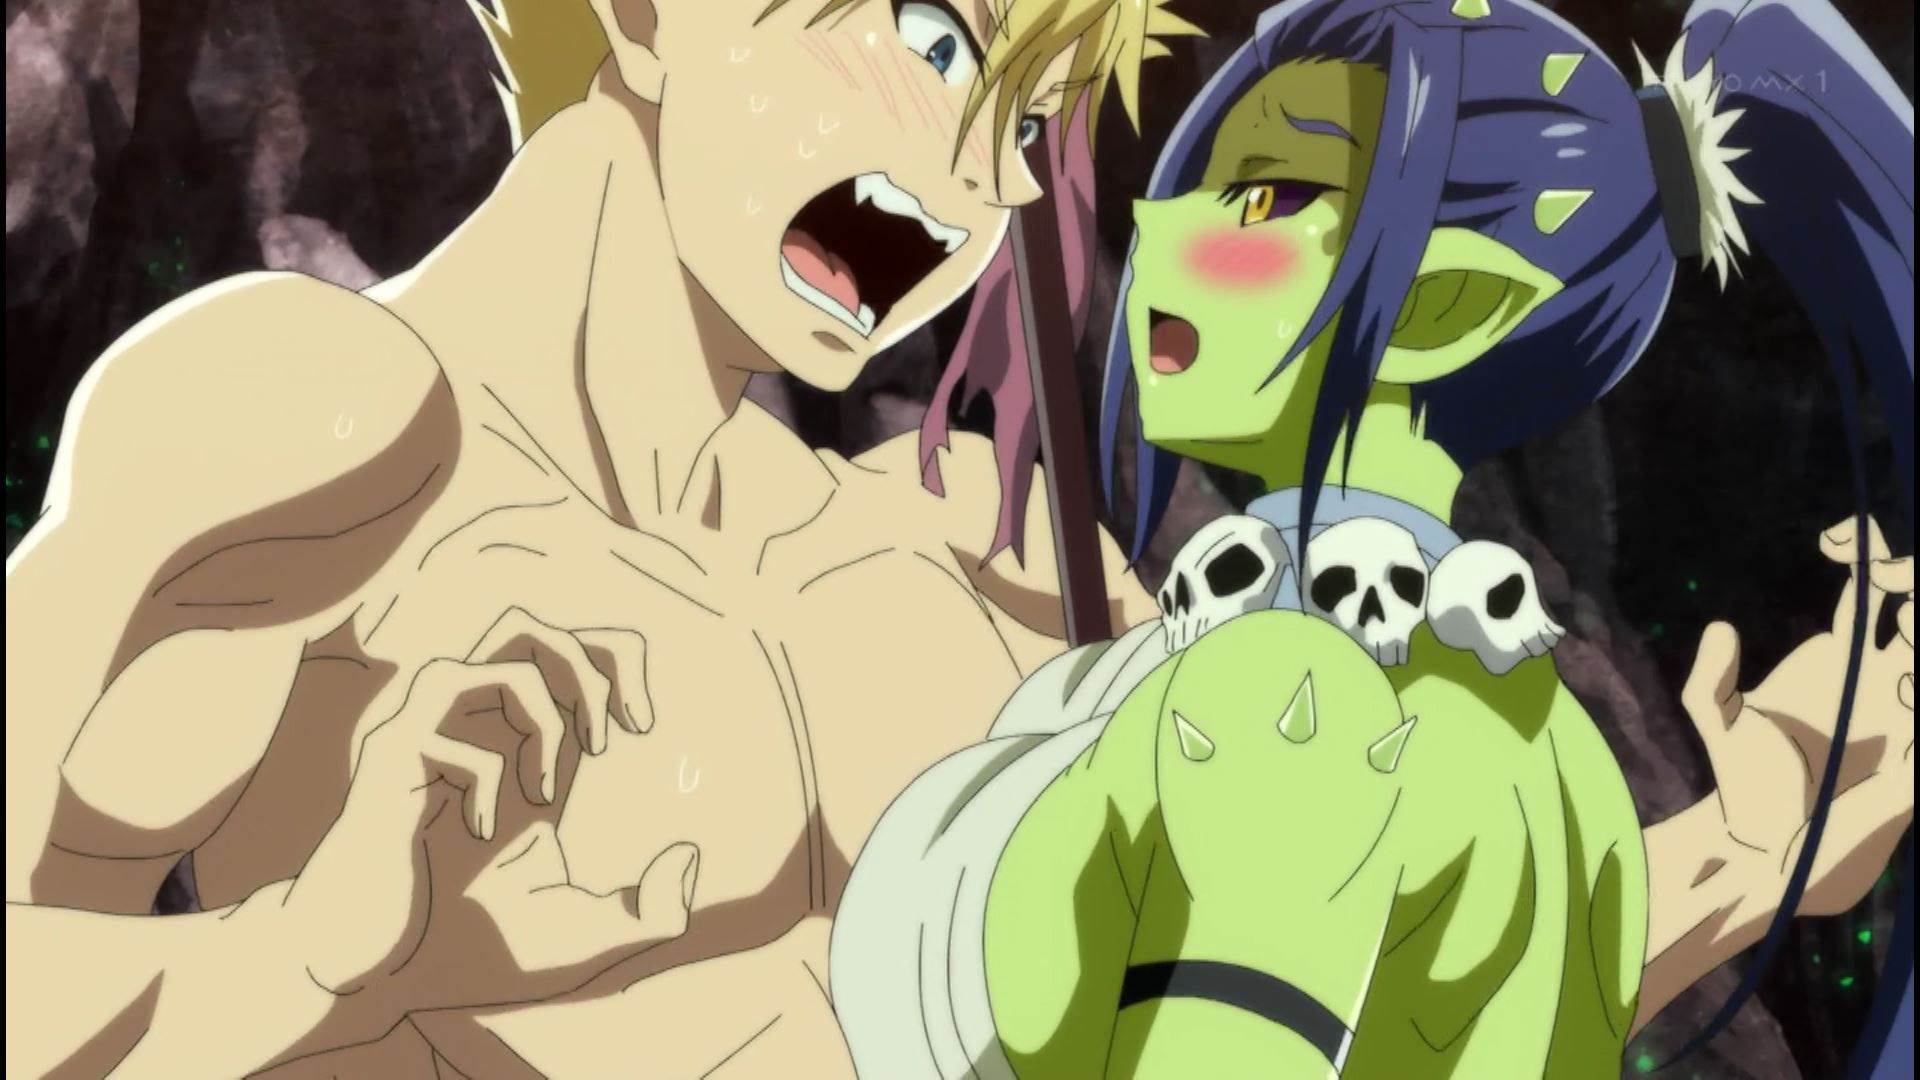 The goblin girl and ecchi scene that got estrus in episode 2 of the second season of the anime "Peter Grill and the Time of the Wise"! 9